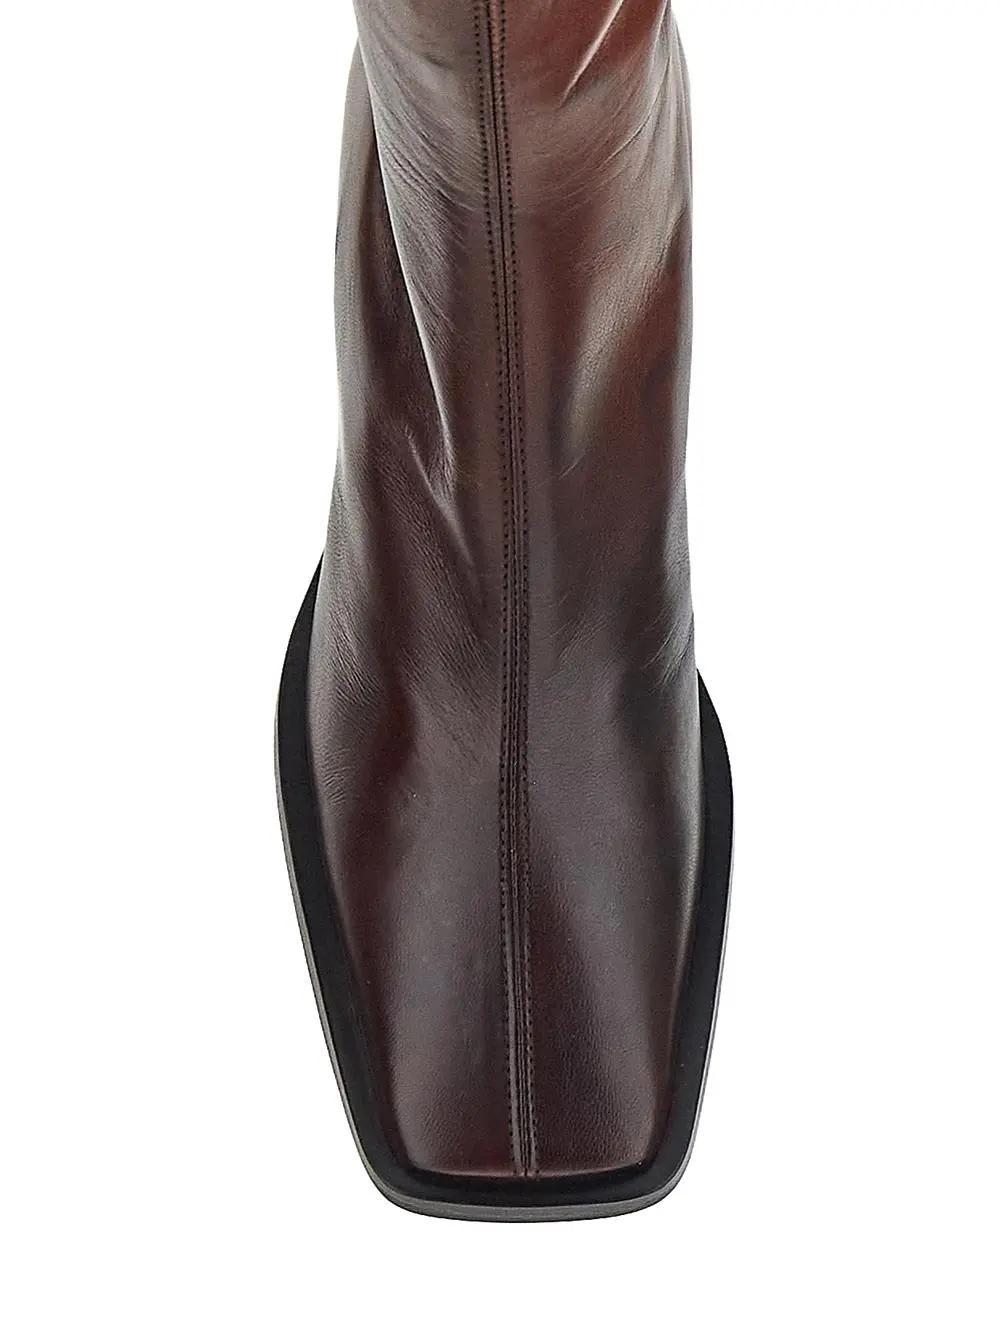 Shop Marine Serre Airbrushed Leather Ankle Boots In Brown